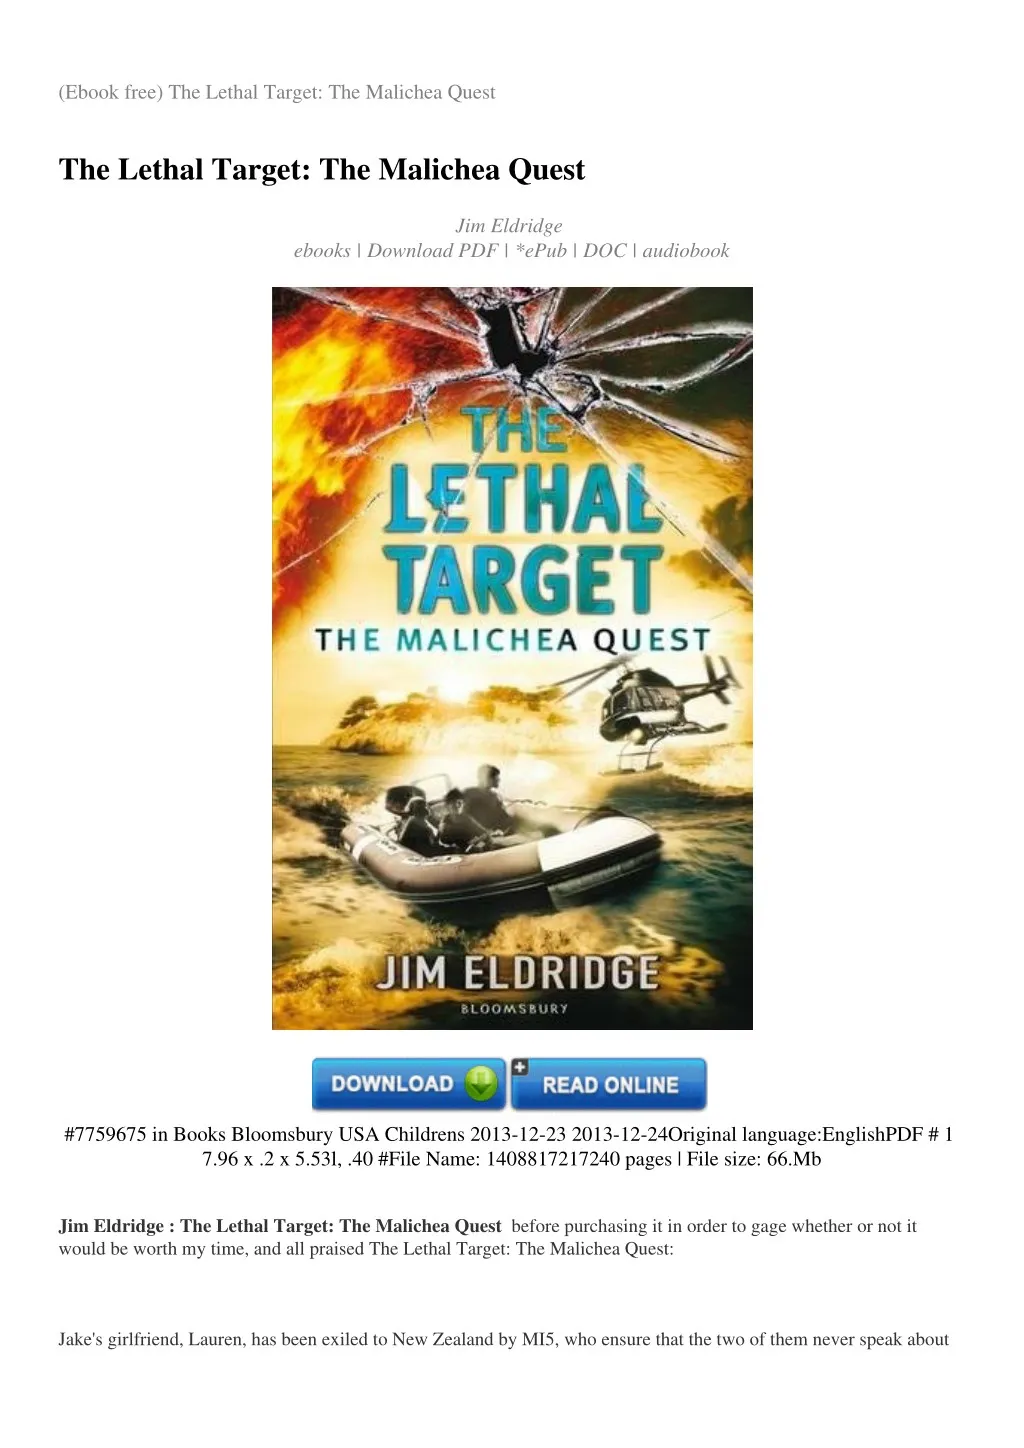 ebook free the lethal target the malichea quest